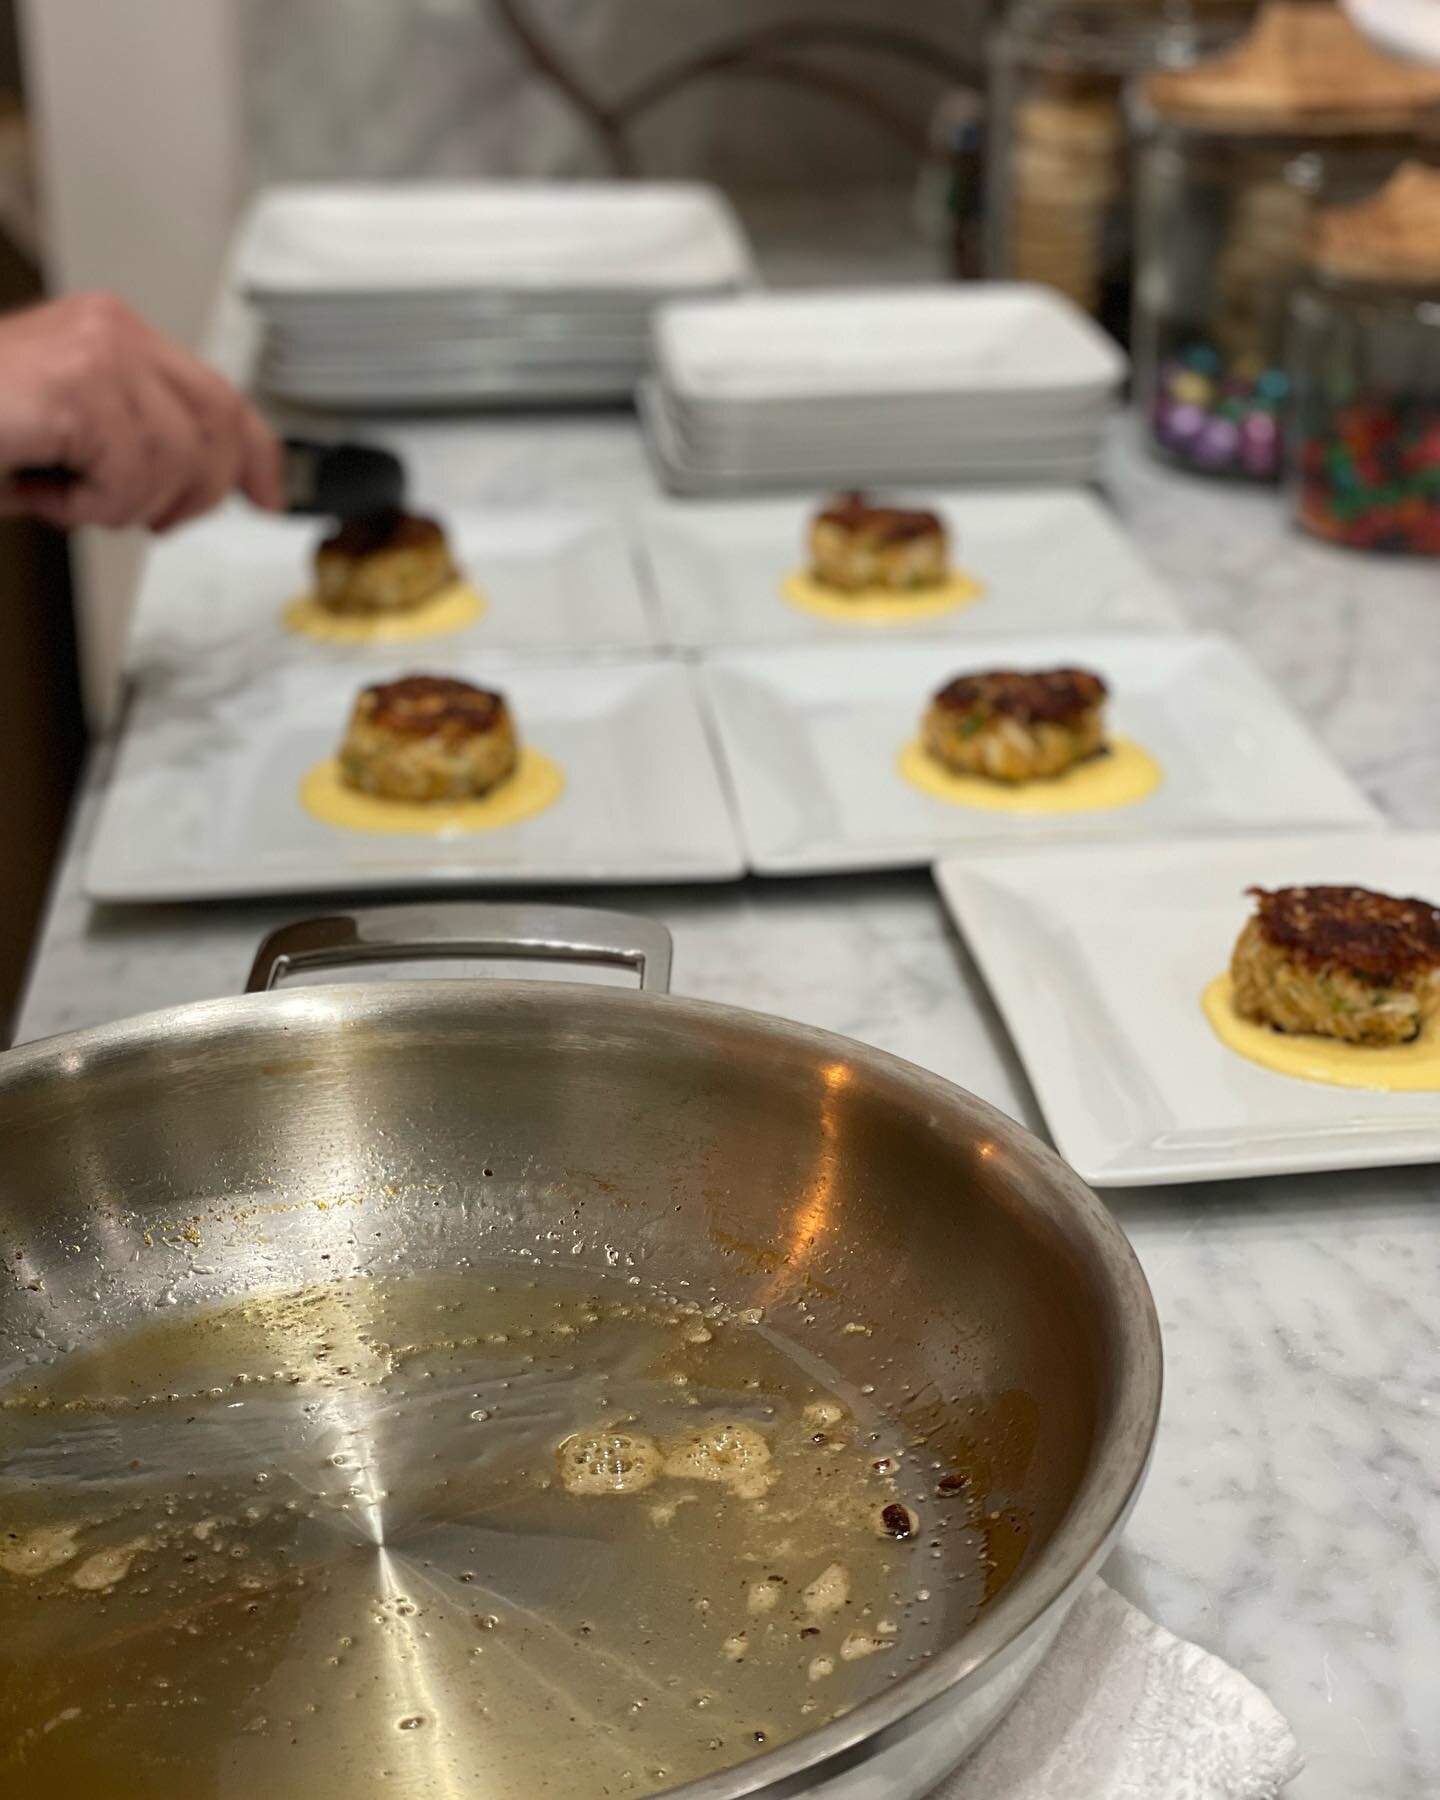 From the pan to your plate. Made from scratch &amp; cooked to order in the comfort &amp; privacy of your home. Chef Nathan served up his signatures last night in Seagrove &amp; made new friends! When it comes to the food &quot;fresh is fresh is fresh